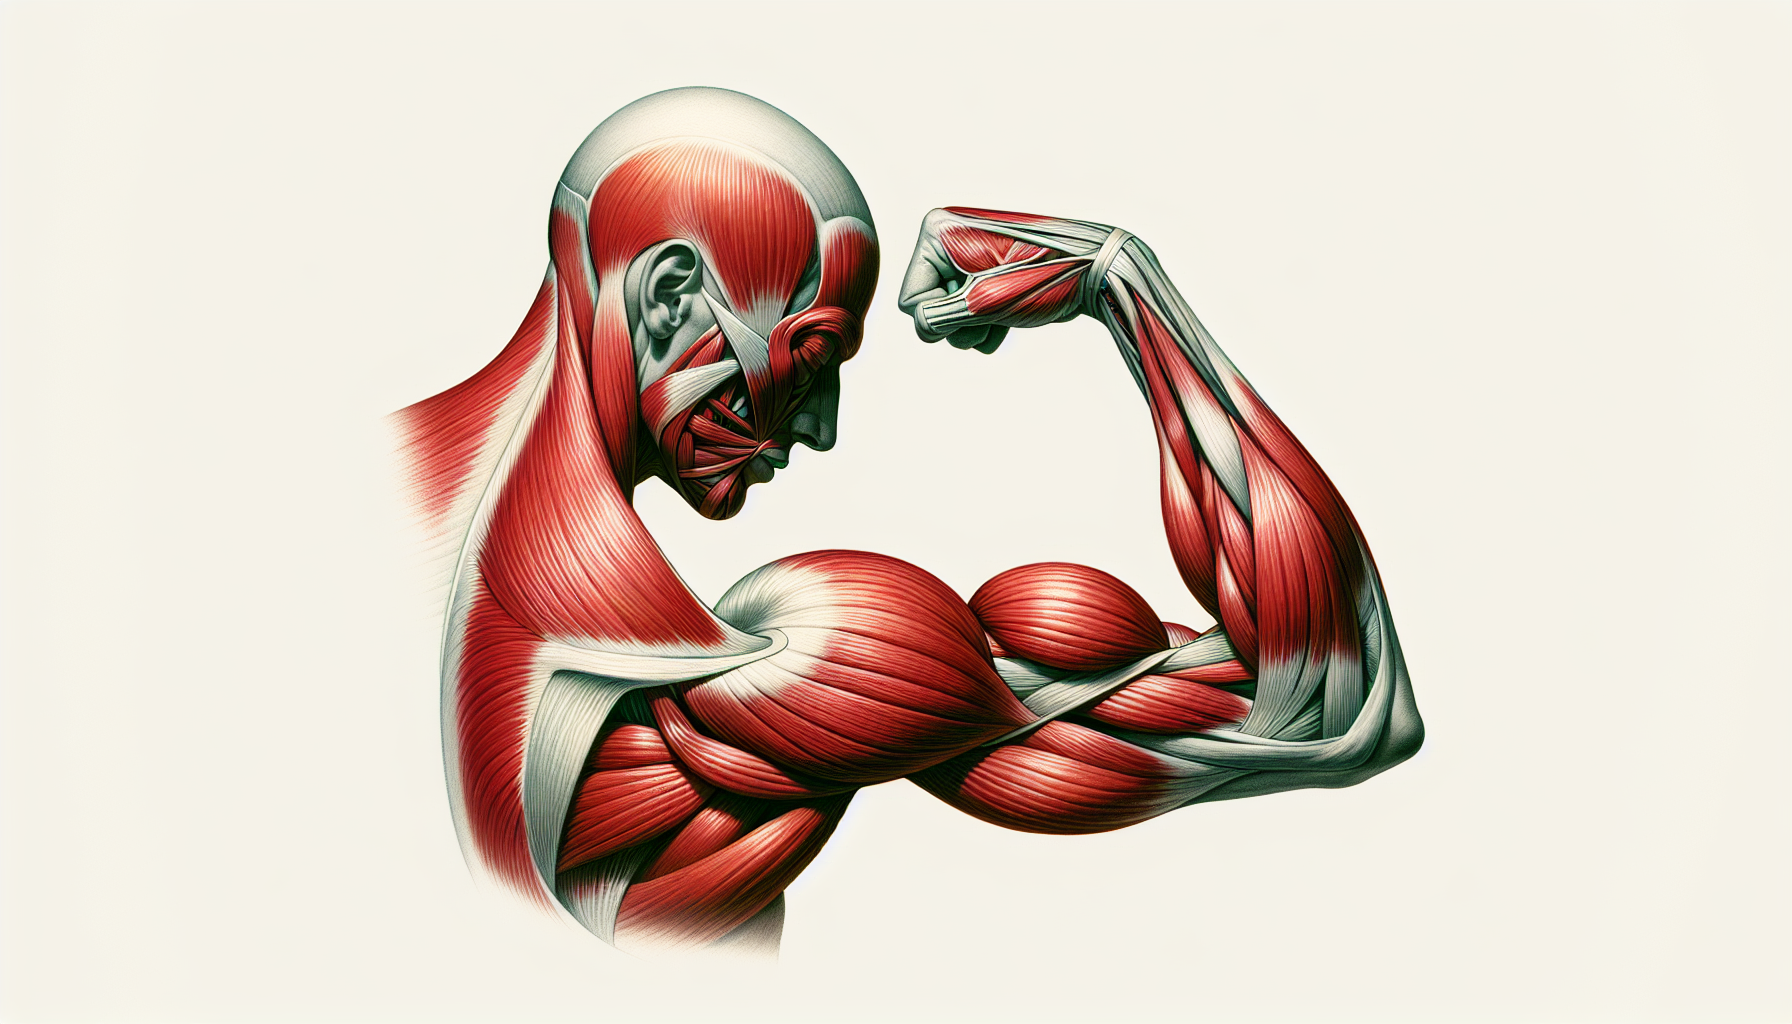 Anatomy of the triceps muscle group